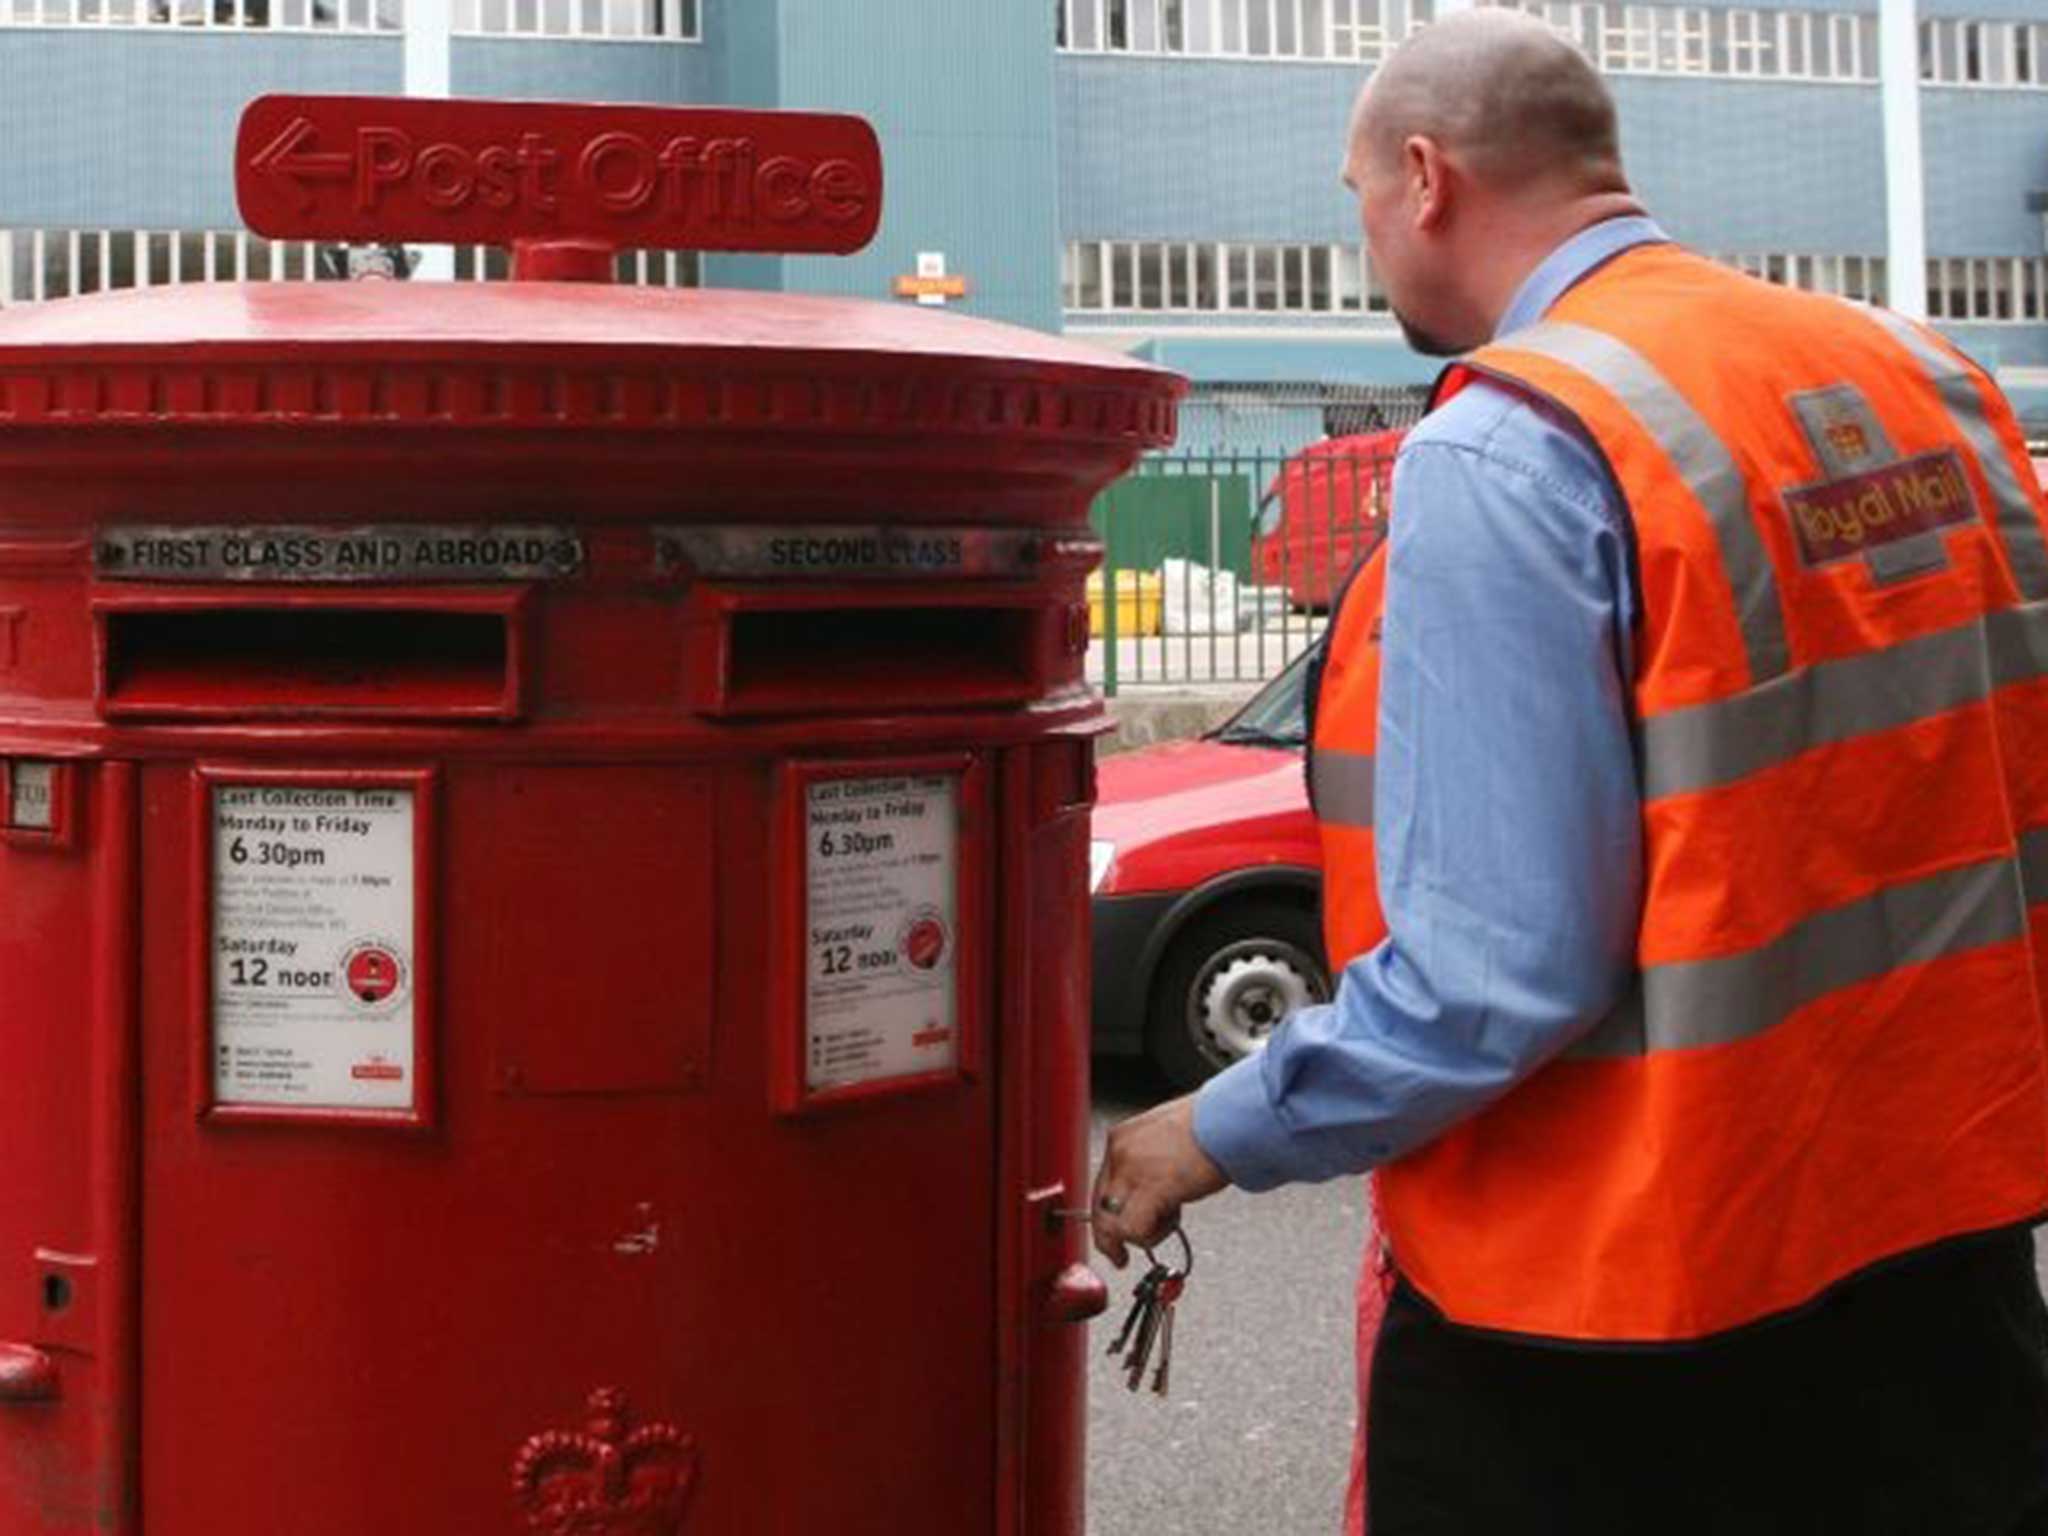 Royal Mail's latest publicity attempt has not been well-received